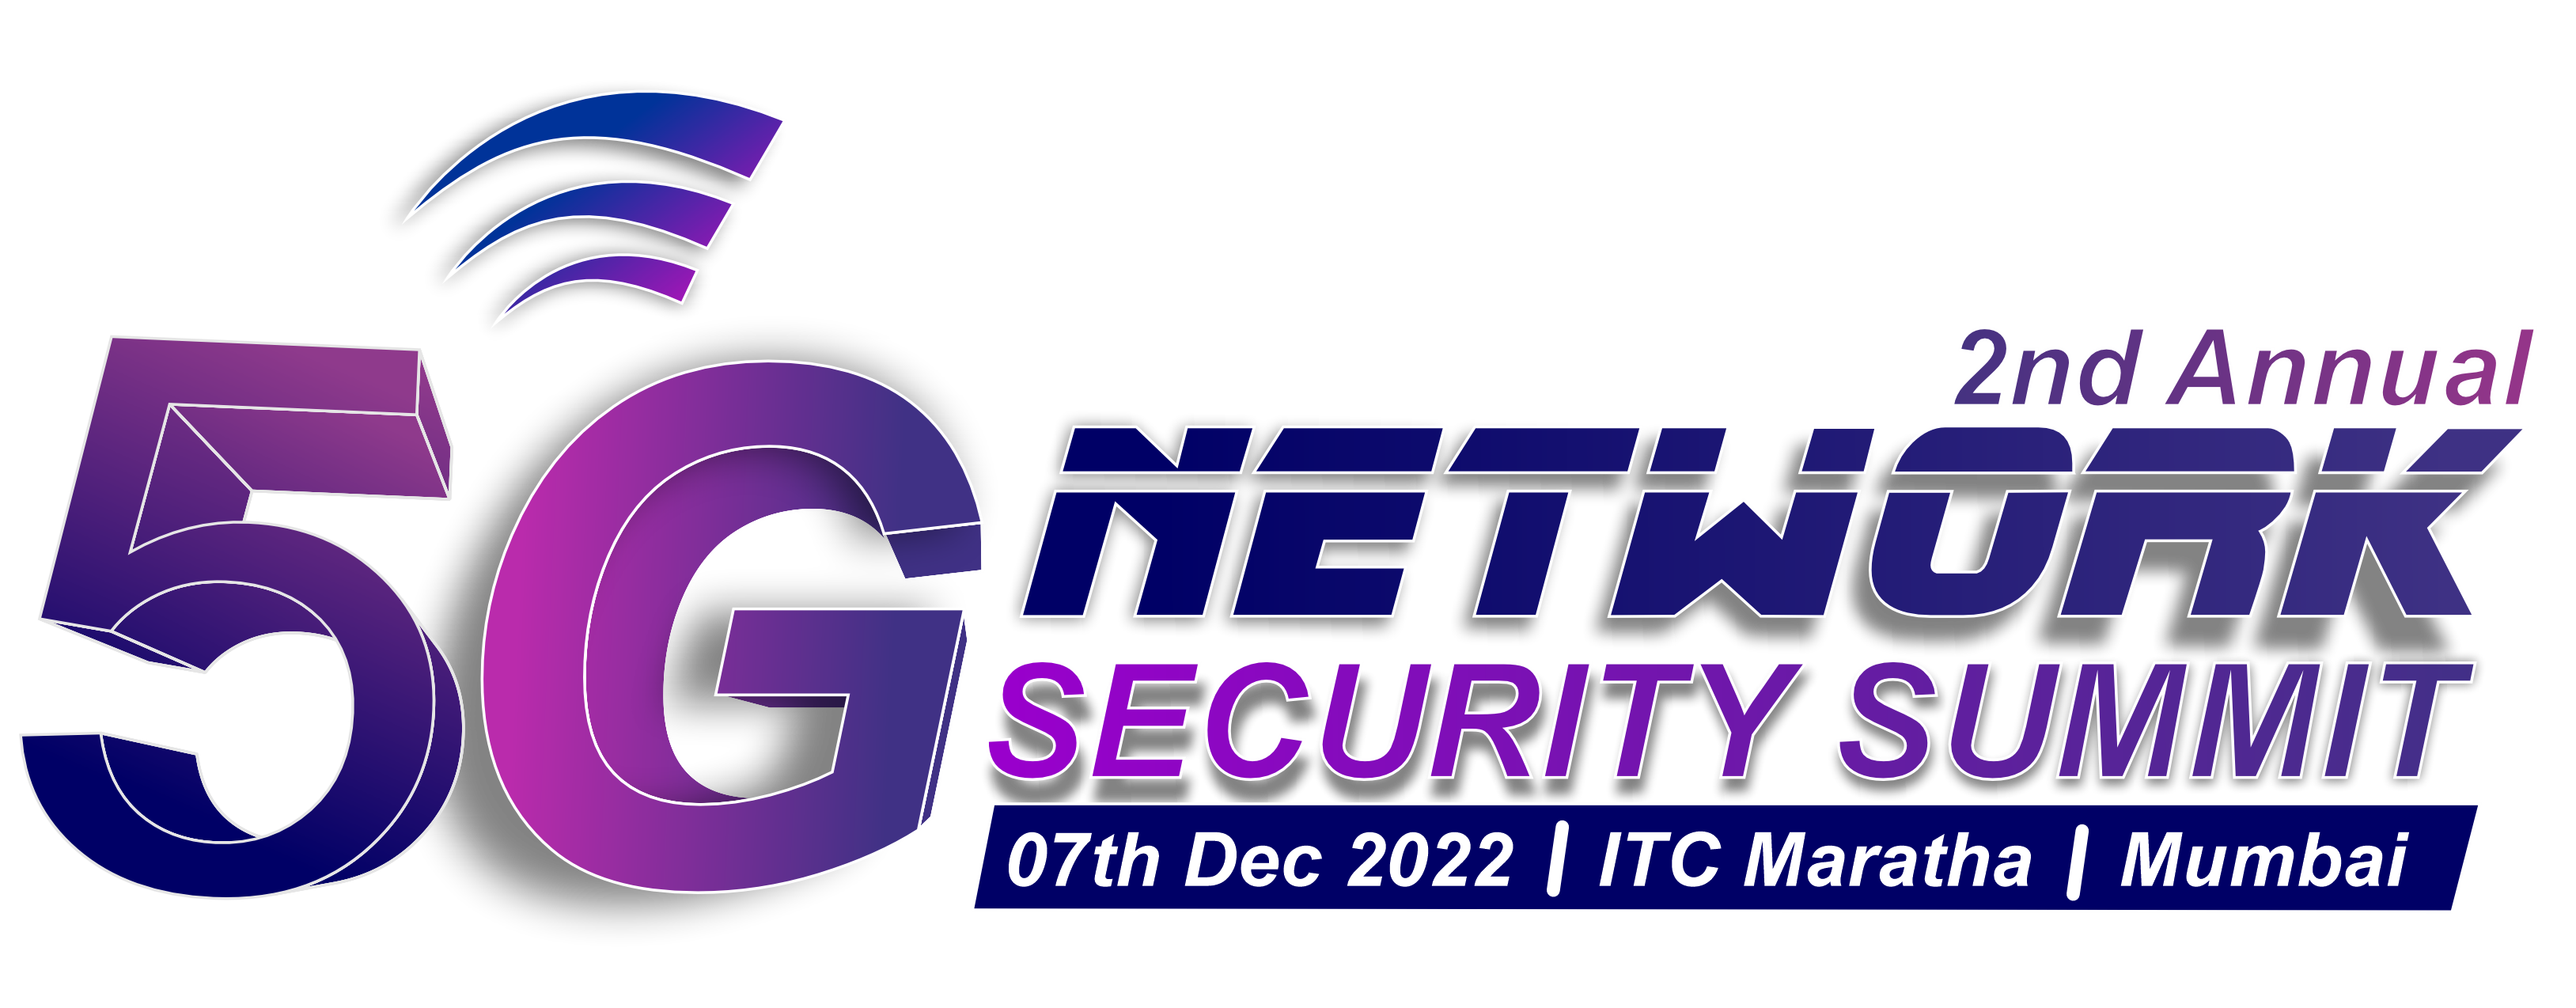 5G Network Security 2022 Logo